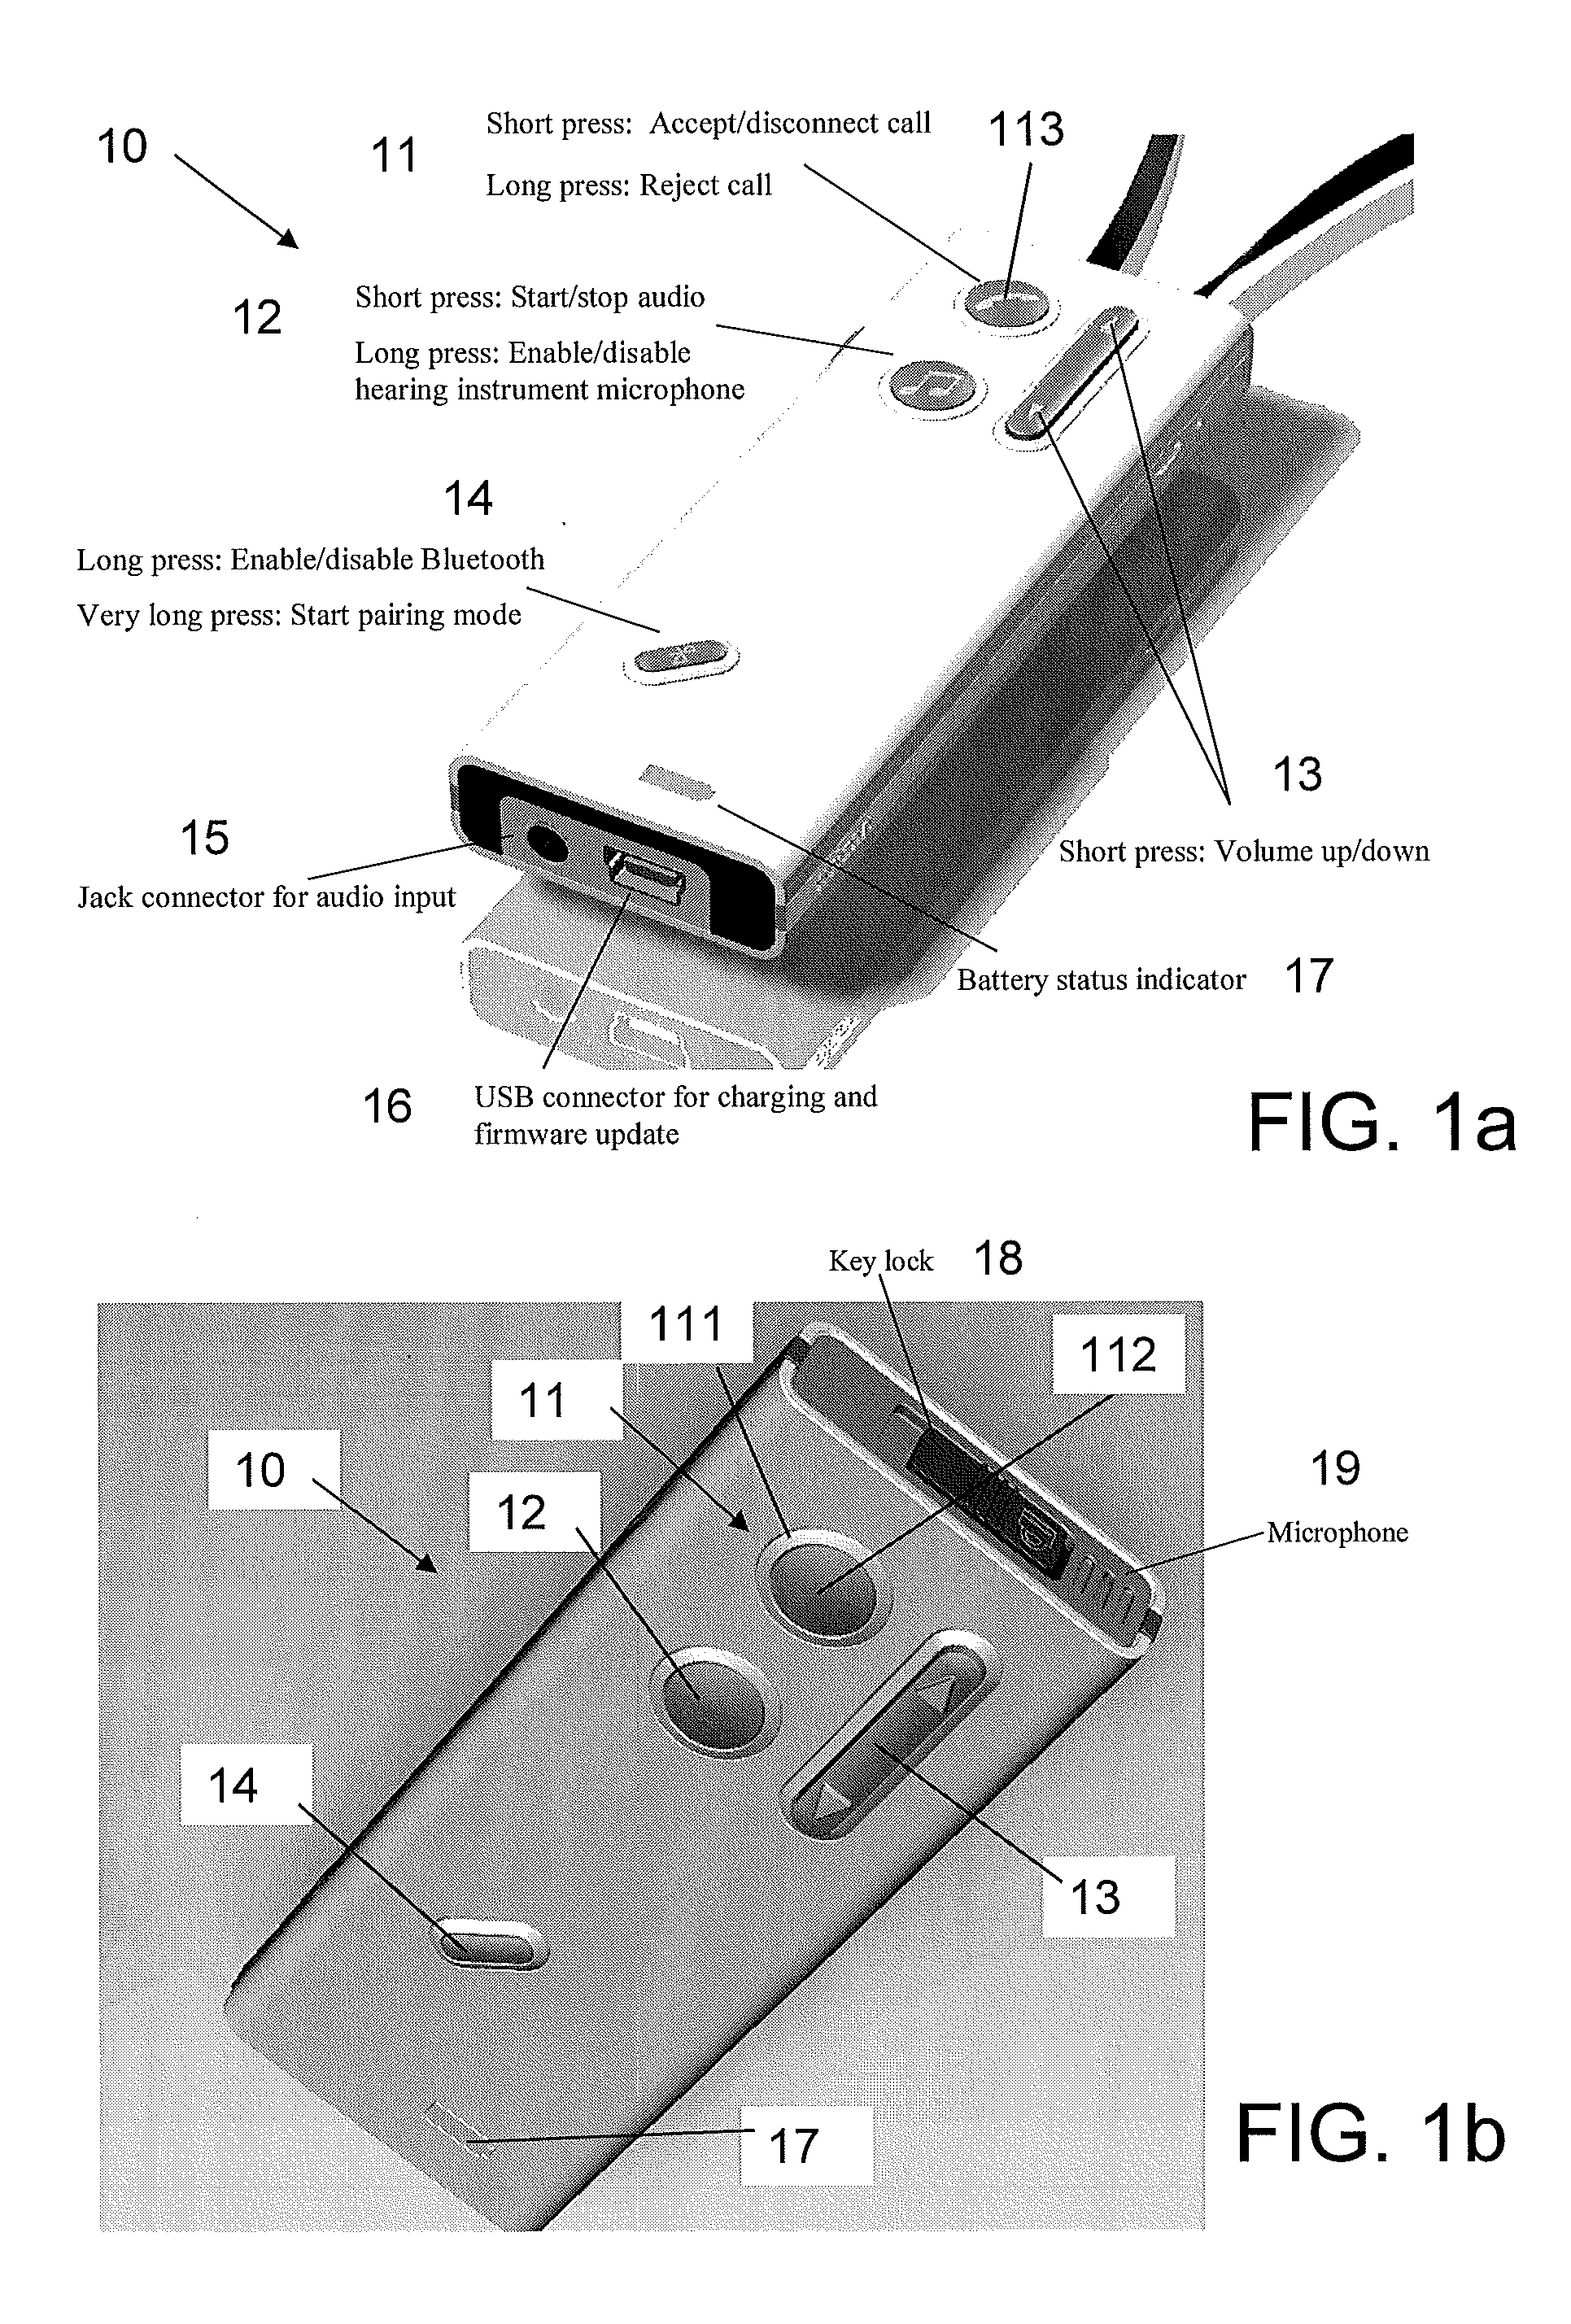 User interface for a communications device